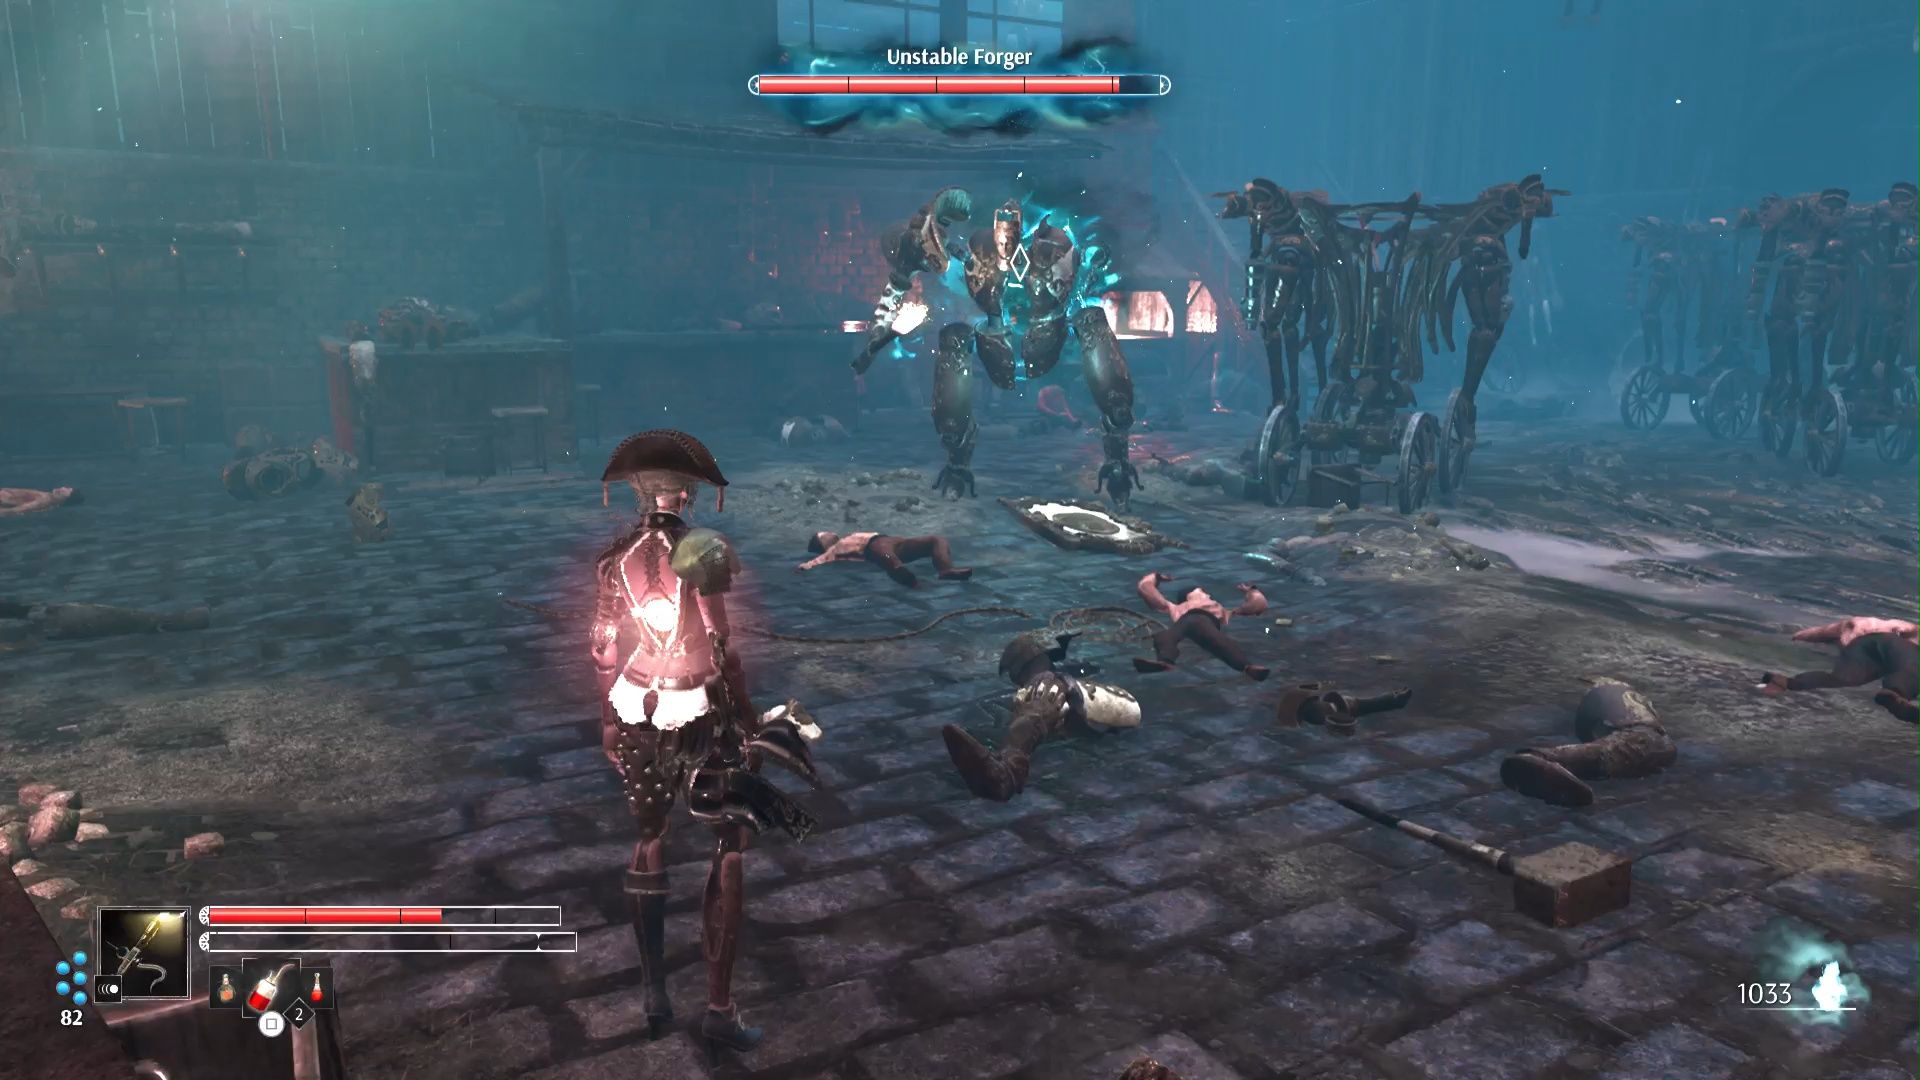 A screenshot from the PS5 version of Steelrising showing Aegis battling the Unstable Forger battle